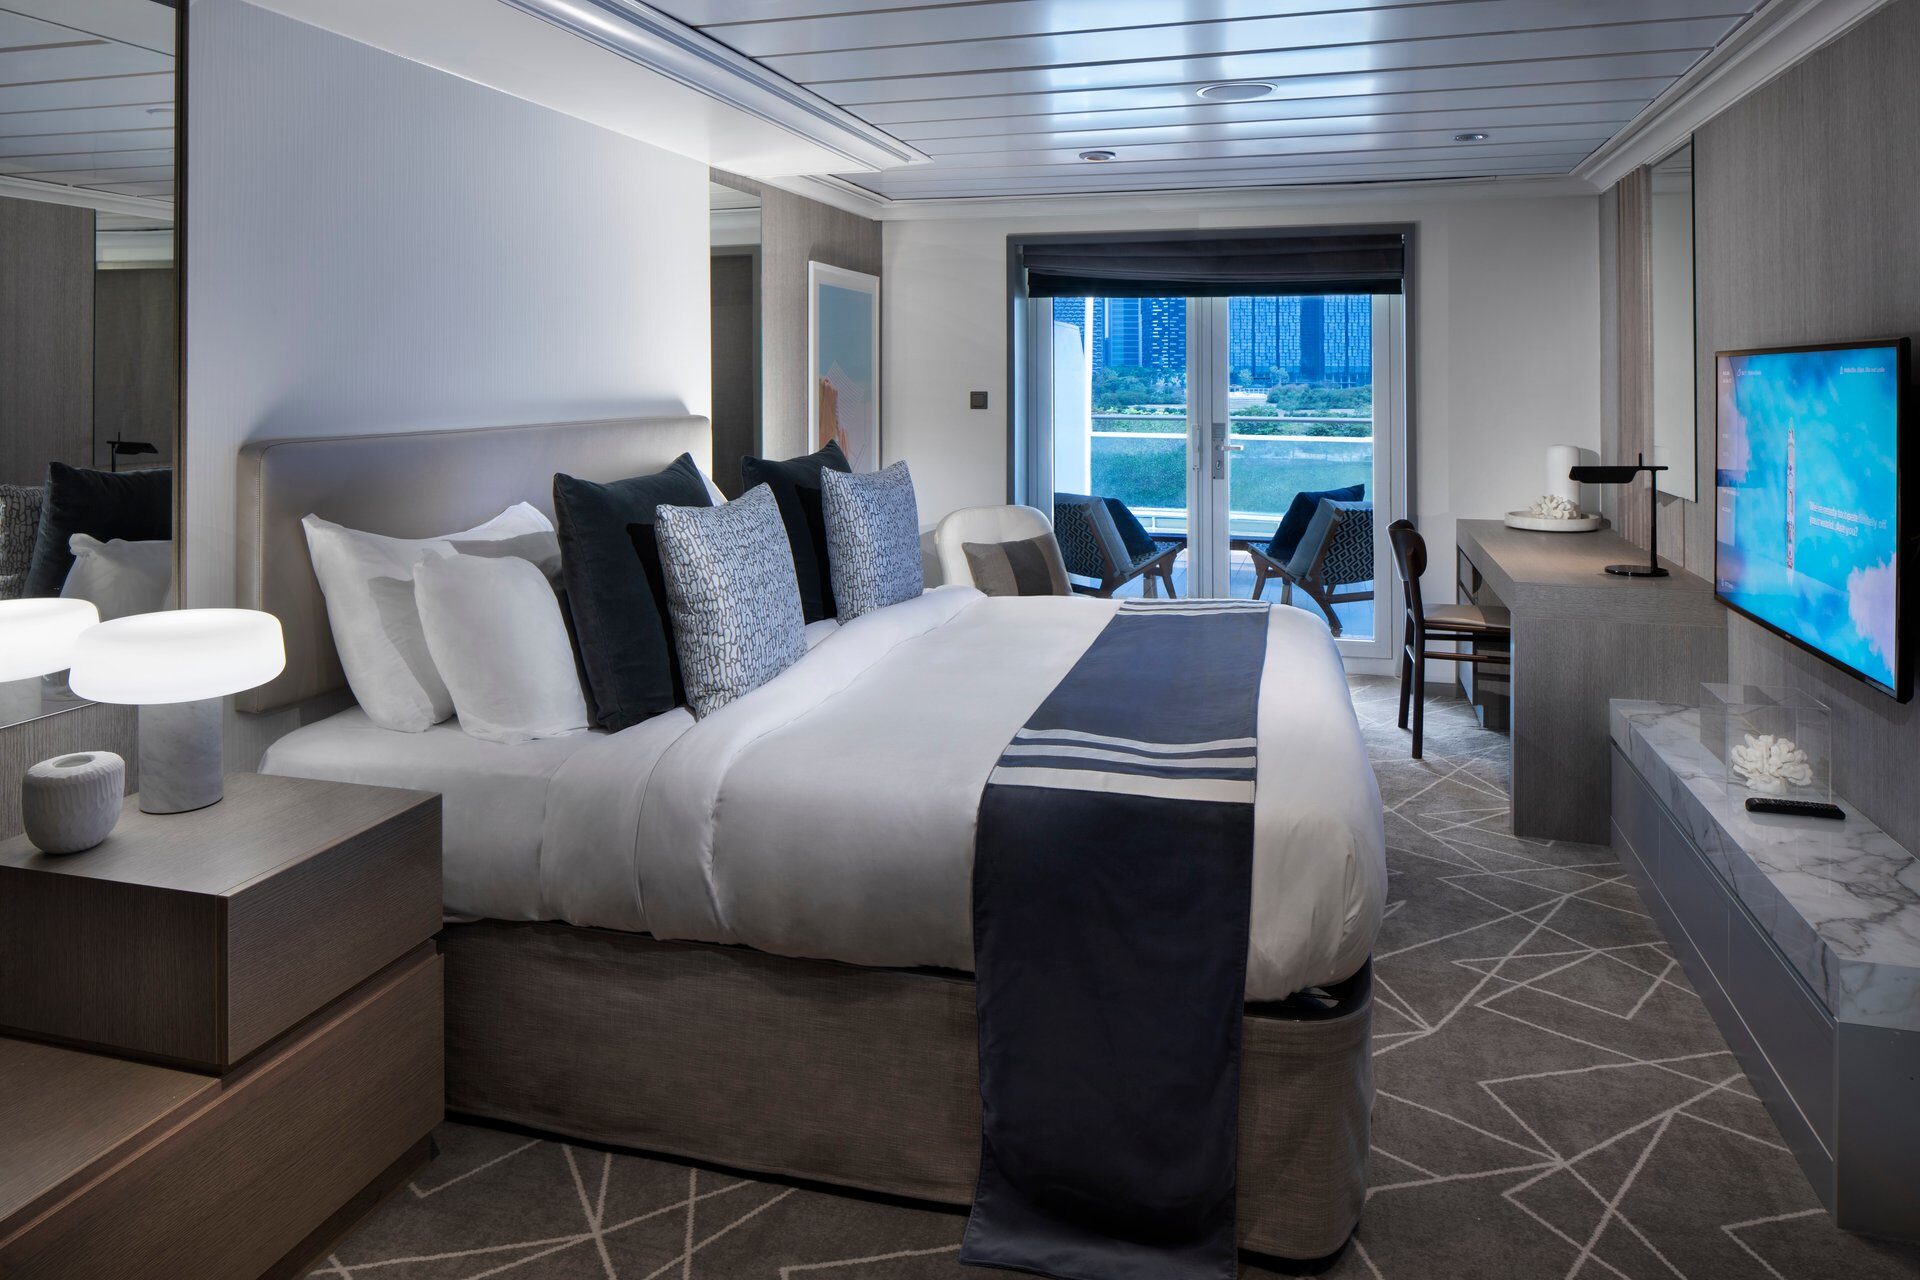 celebrity summit cruise ship rooms